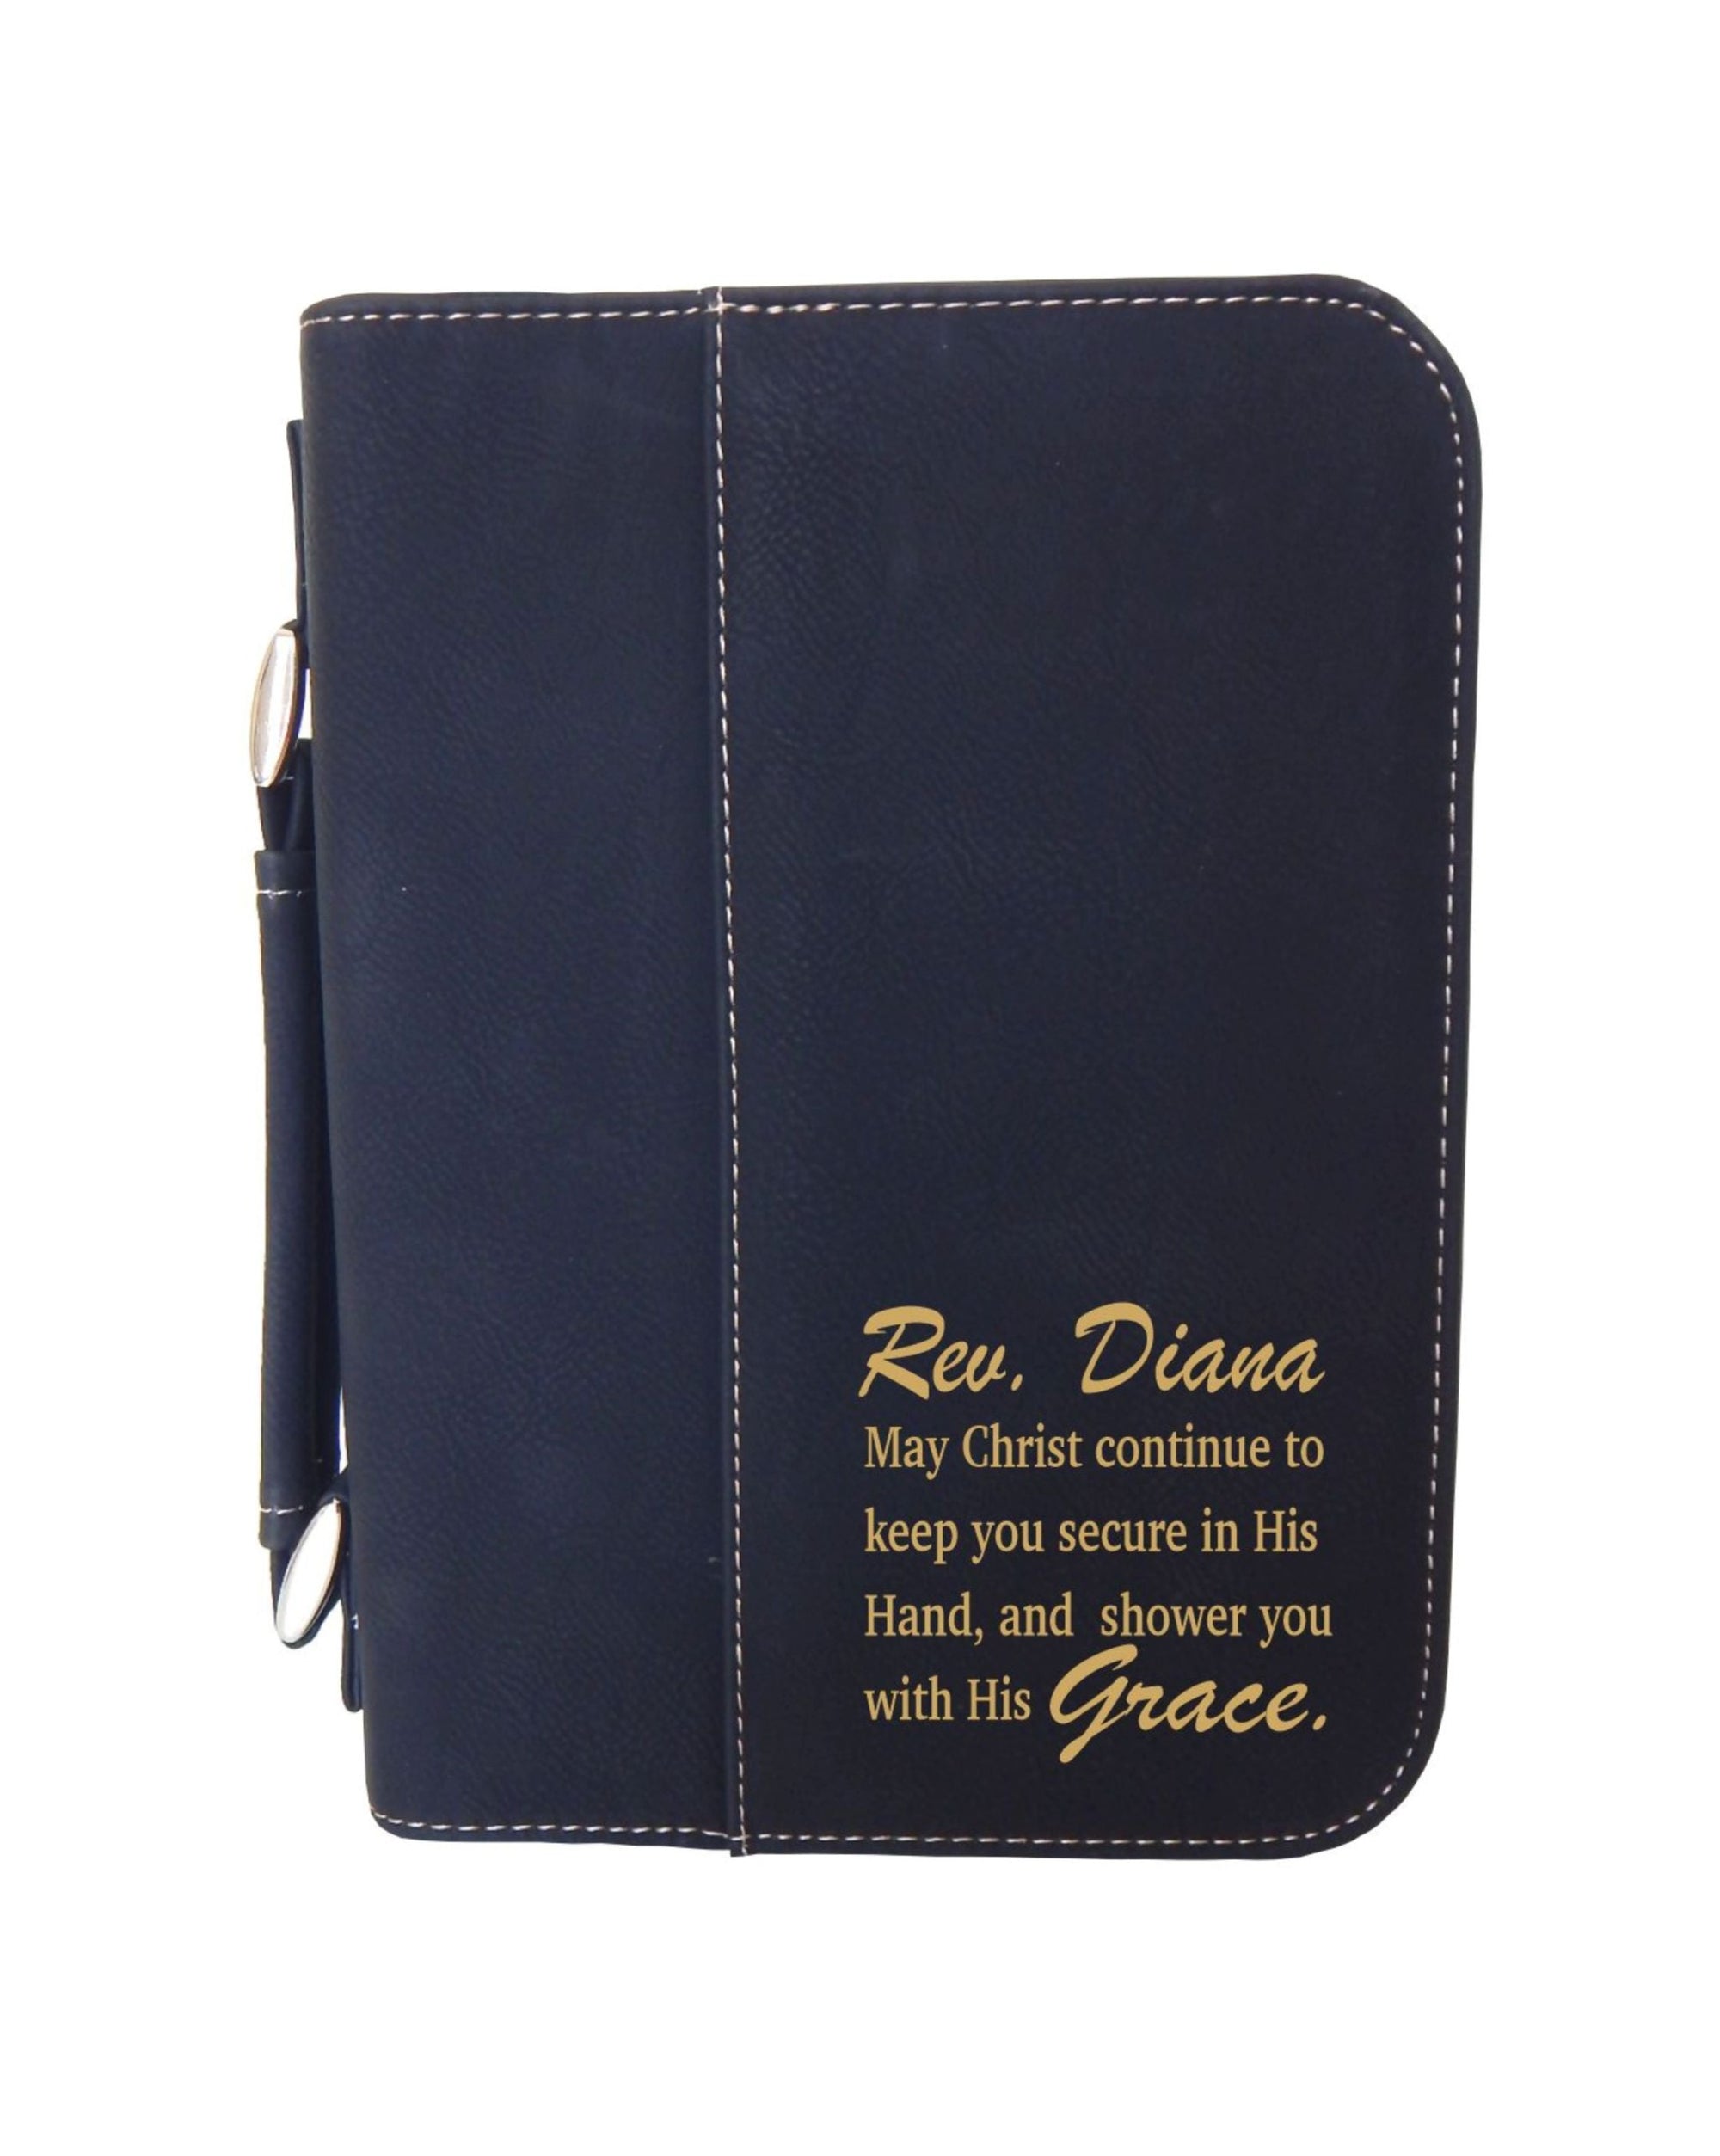 Christian Gifts for Women  | Religious Gift for Mom | Engraved Leather Bible Cover BCL016